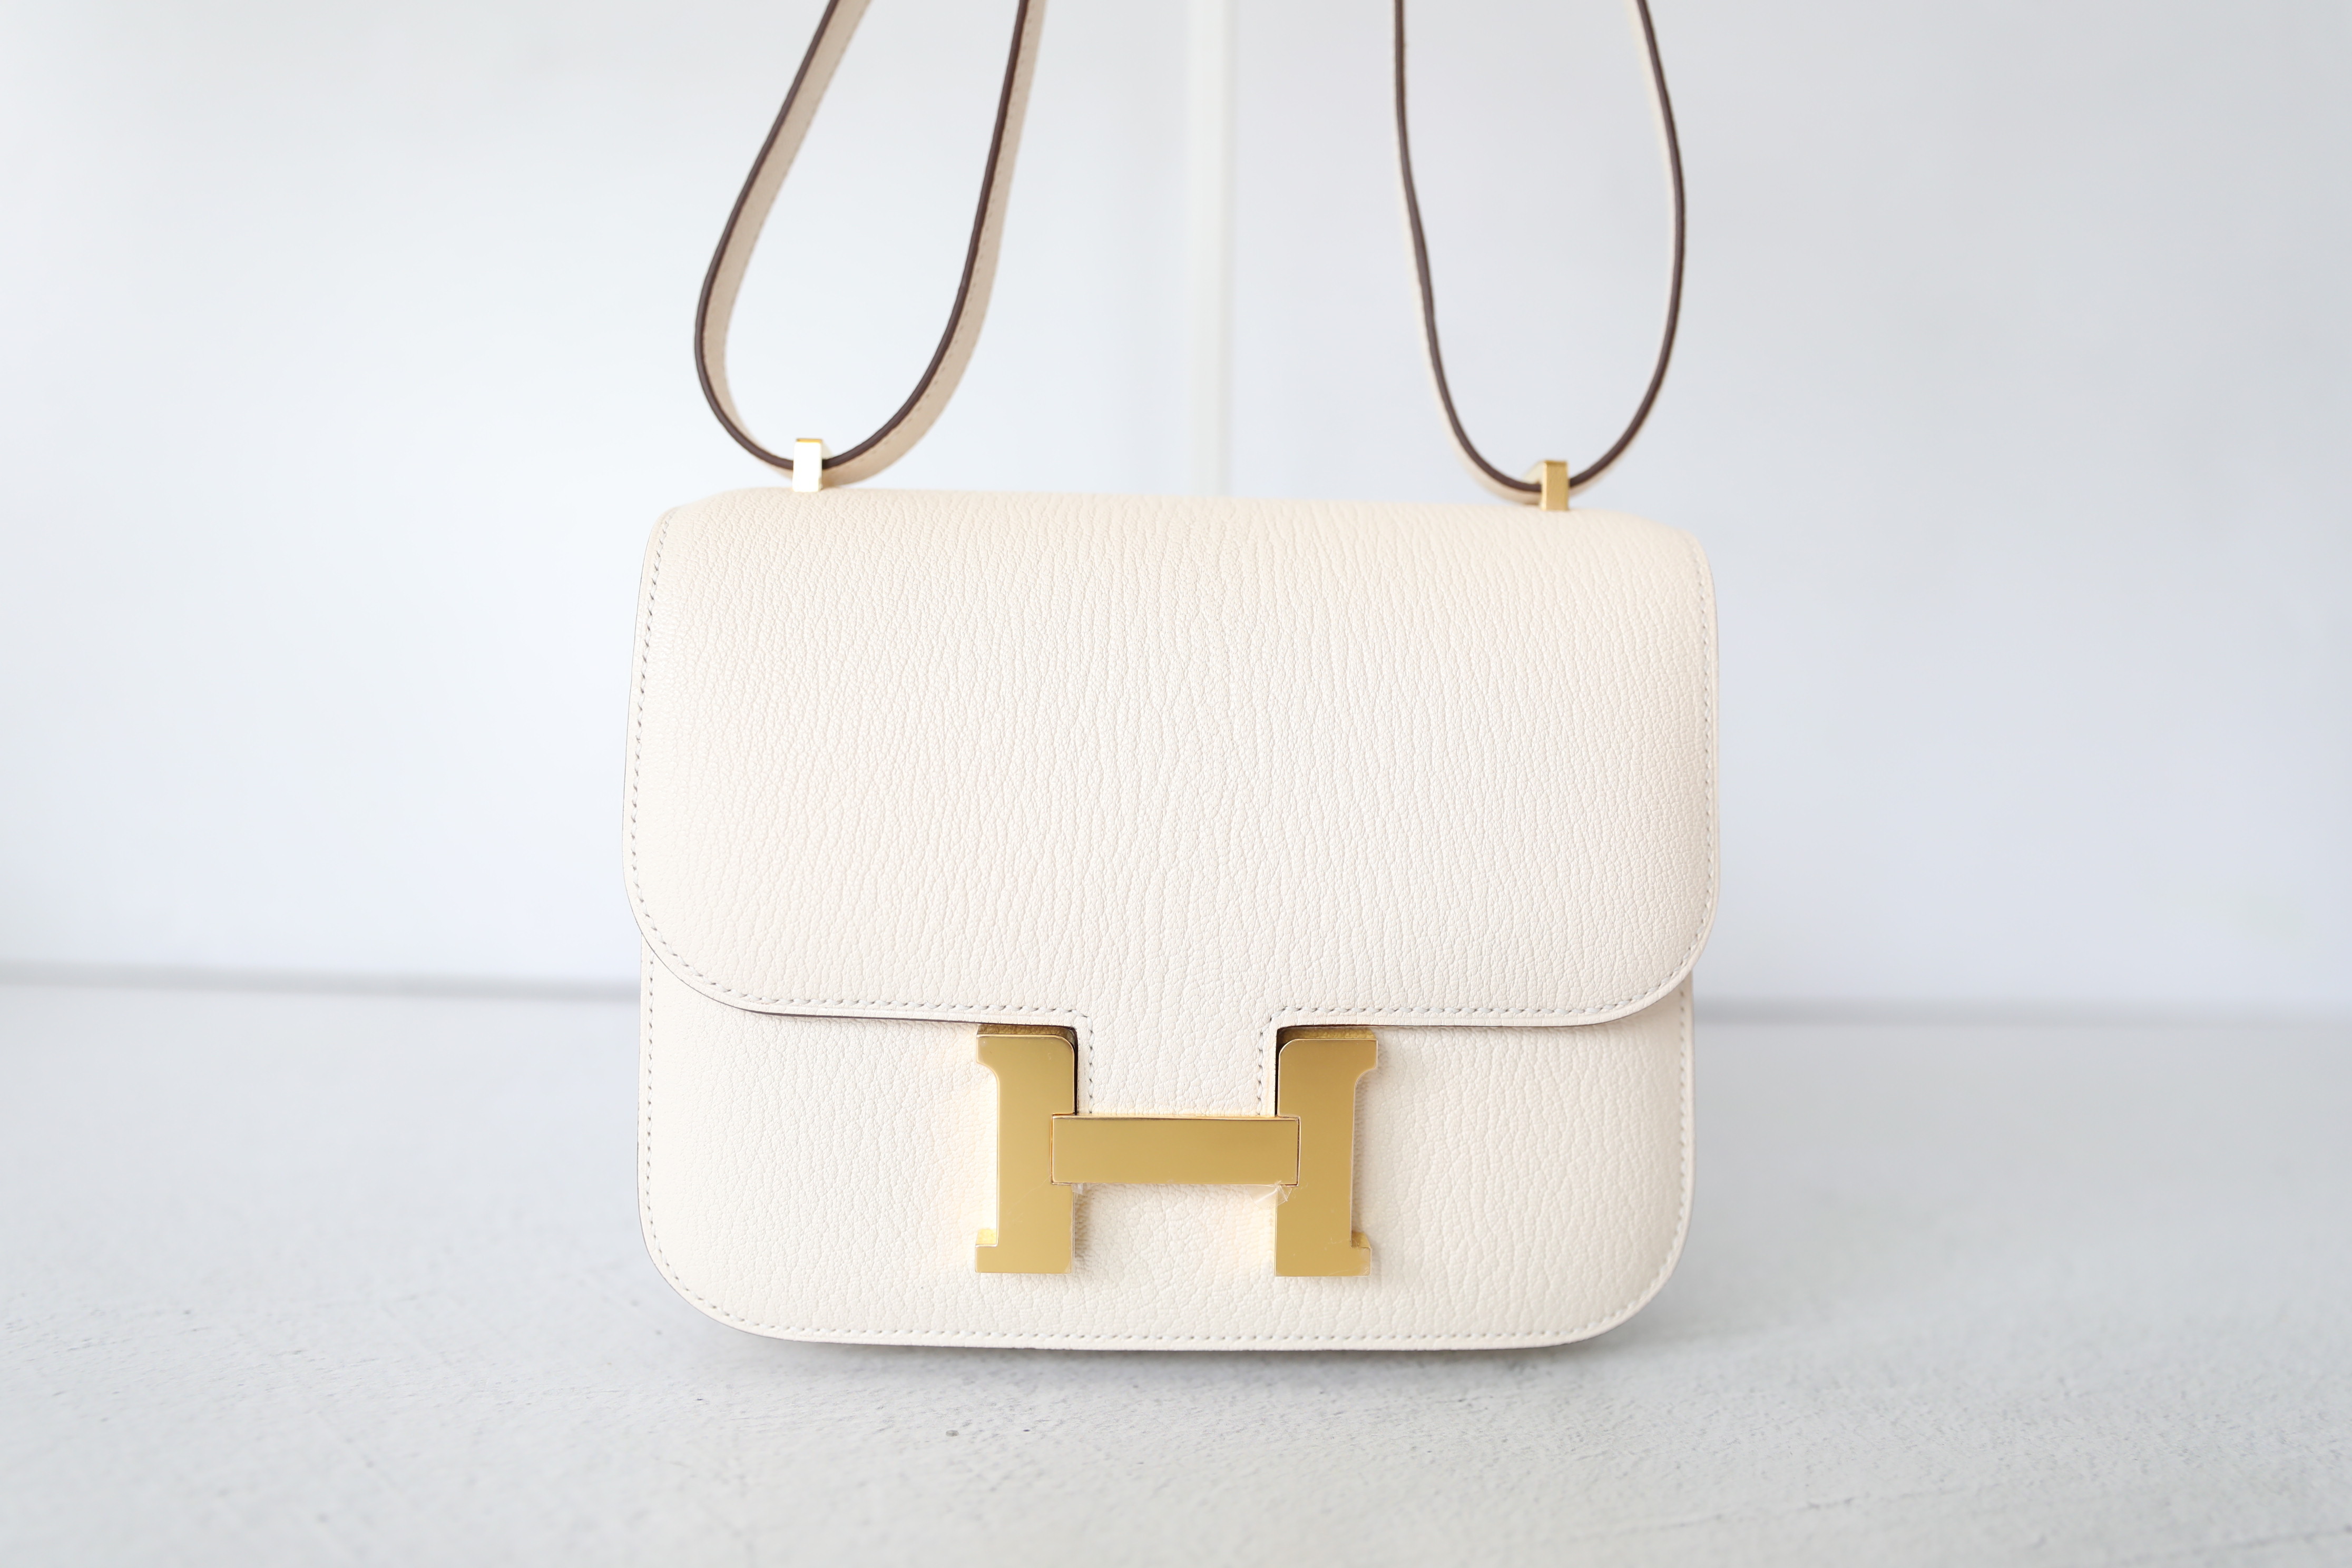 Hermes Constance 18 Reedition, White with Gold Hardware, New in Box WA001